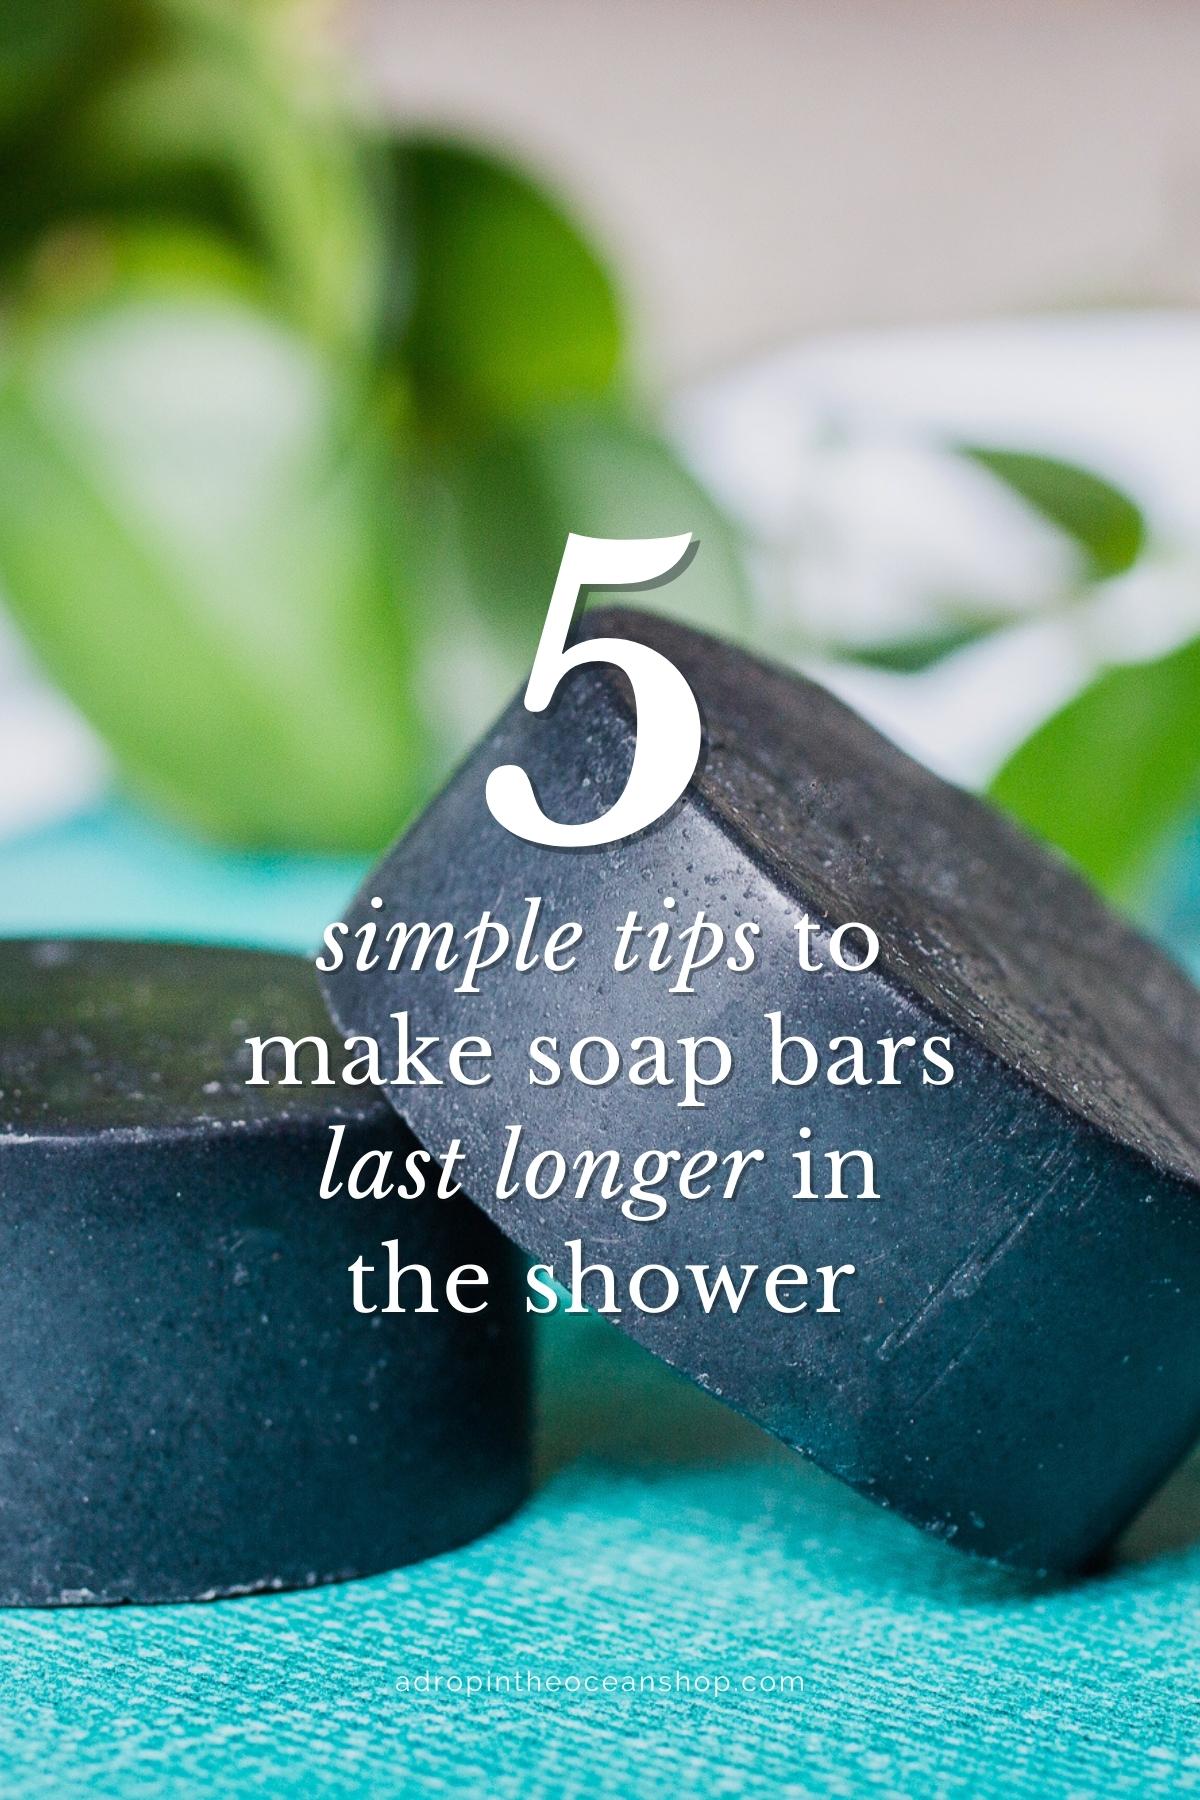 A Drop in the Ocean Zero Waste Shop 5 Simple Tips to Make Soap Bars Last Longer in the Shower